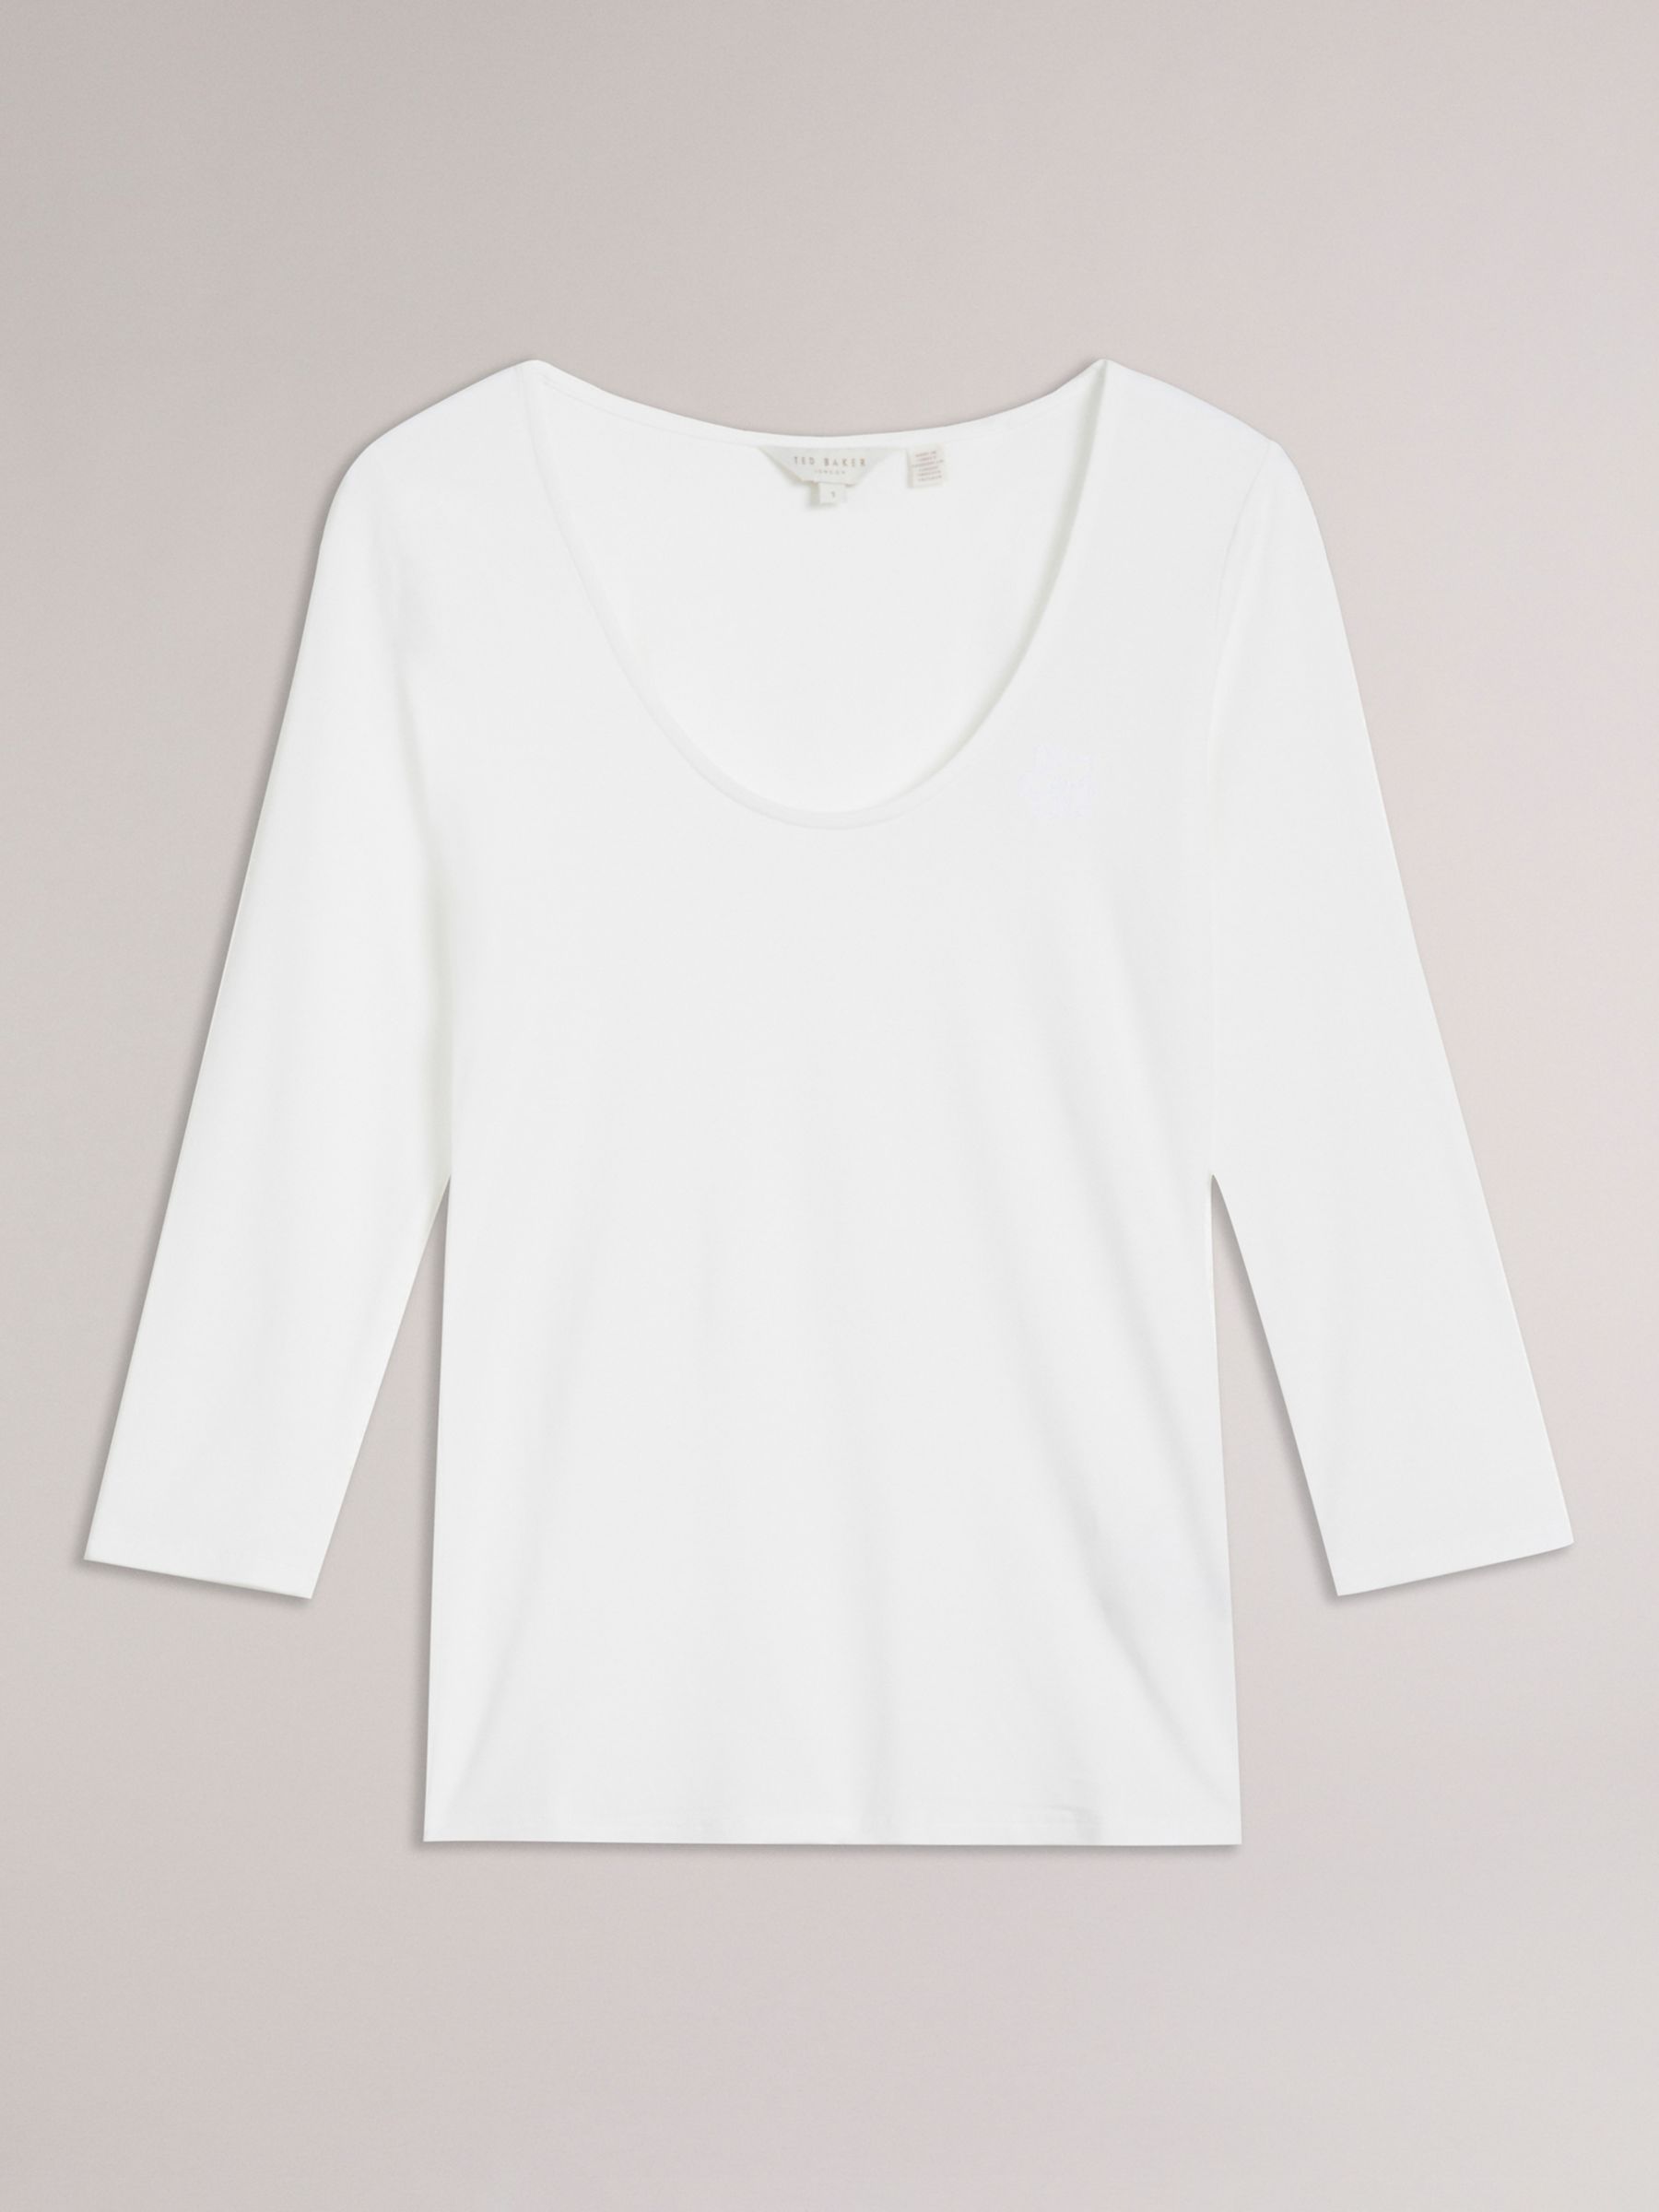 Ted Baker Carsha Scoop Neck Top, White, 6